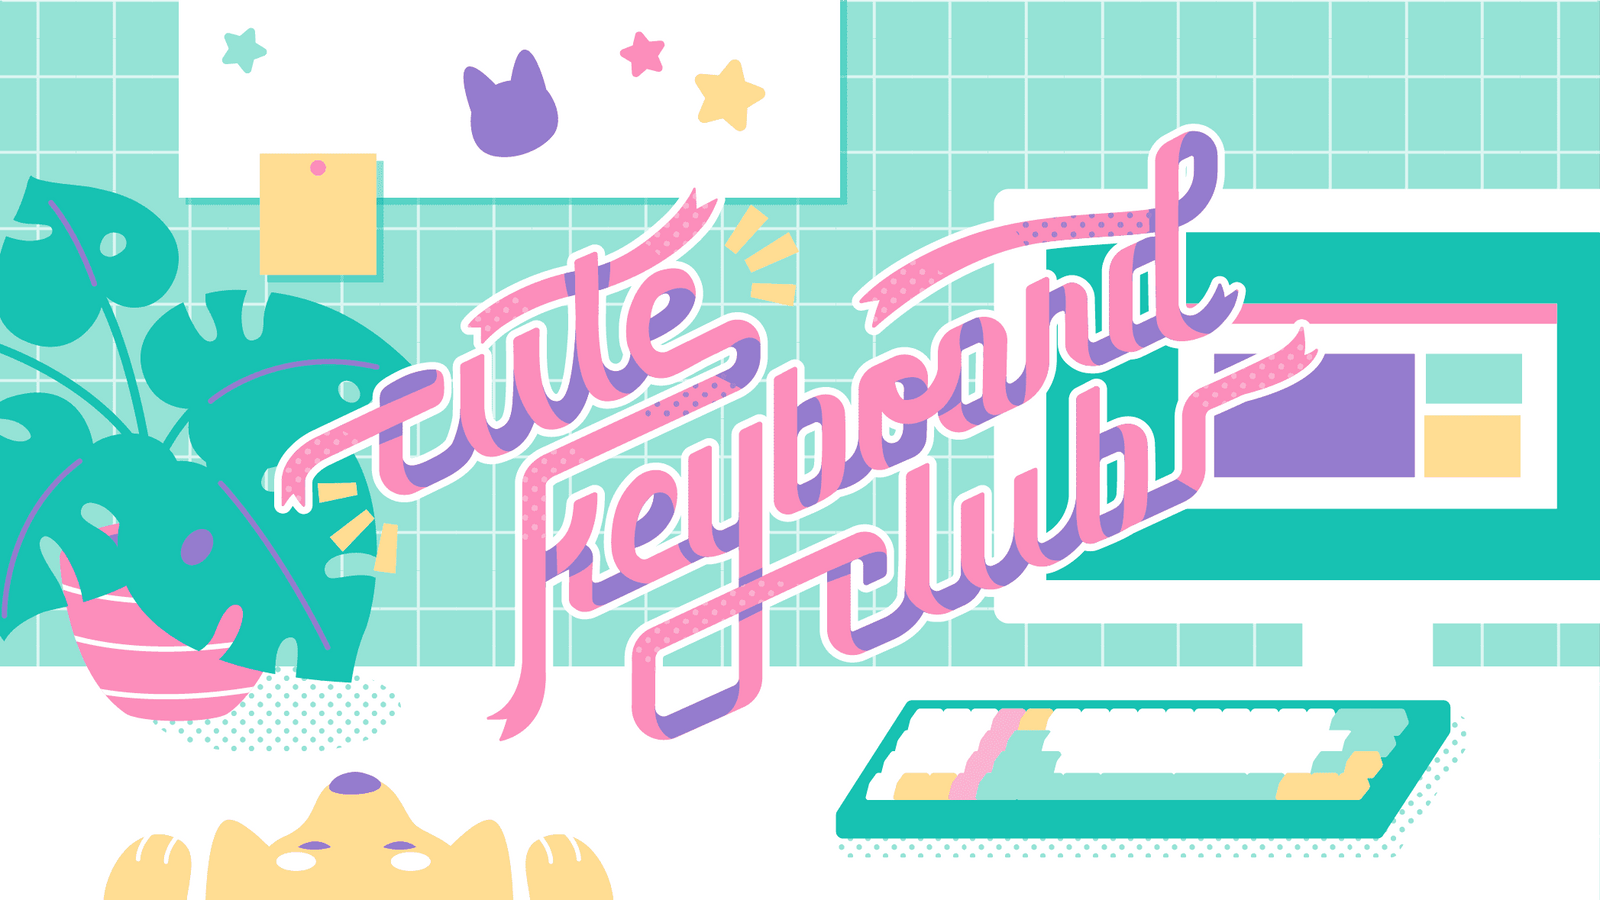 Cute Keyboard Club discord banner featuring ribbon text and pastel desk illustration.